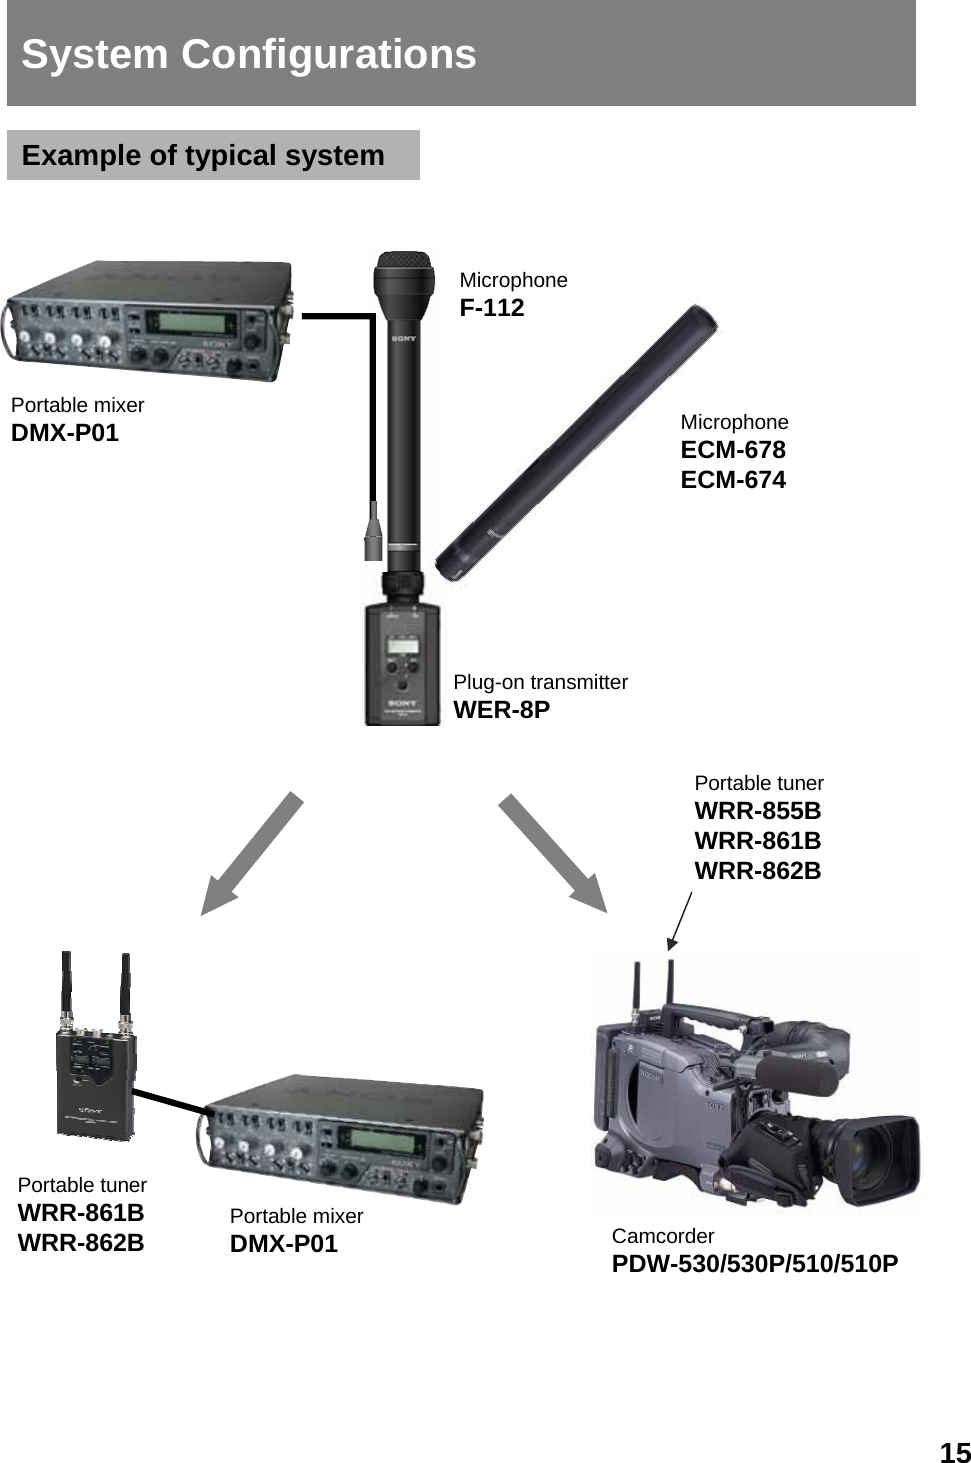 System ConfigurationsExample of typical systemPortable mixerDMX-P01MicrophoneF-112Plug-on transmitterWER-8PMicrophoneECM-678ECM-674Portable tunerWRR-855BWRR-861BWRR-862BPortable tunerWRR-861BWRR-862B Portable mixerDMX-P01 CamcorderPDW-530/530P/510/510P15